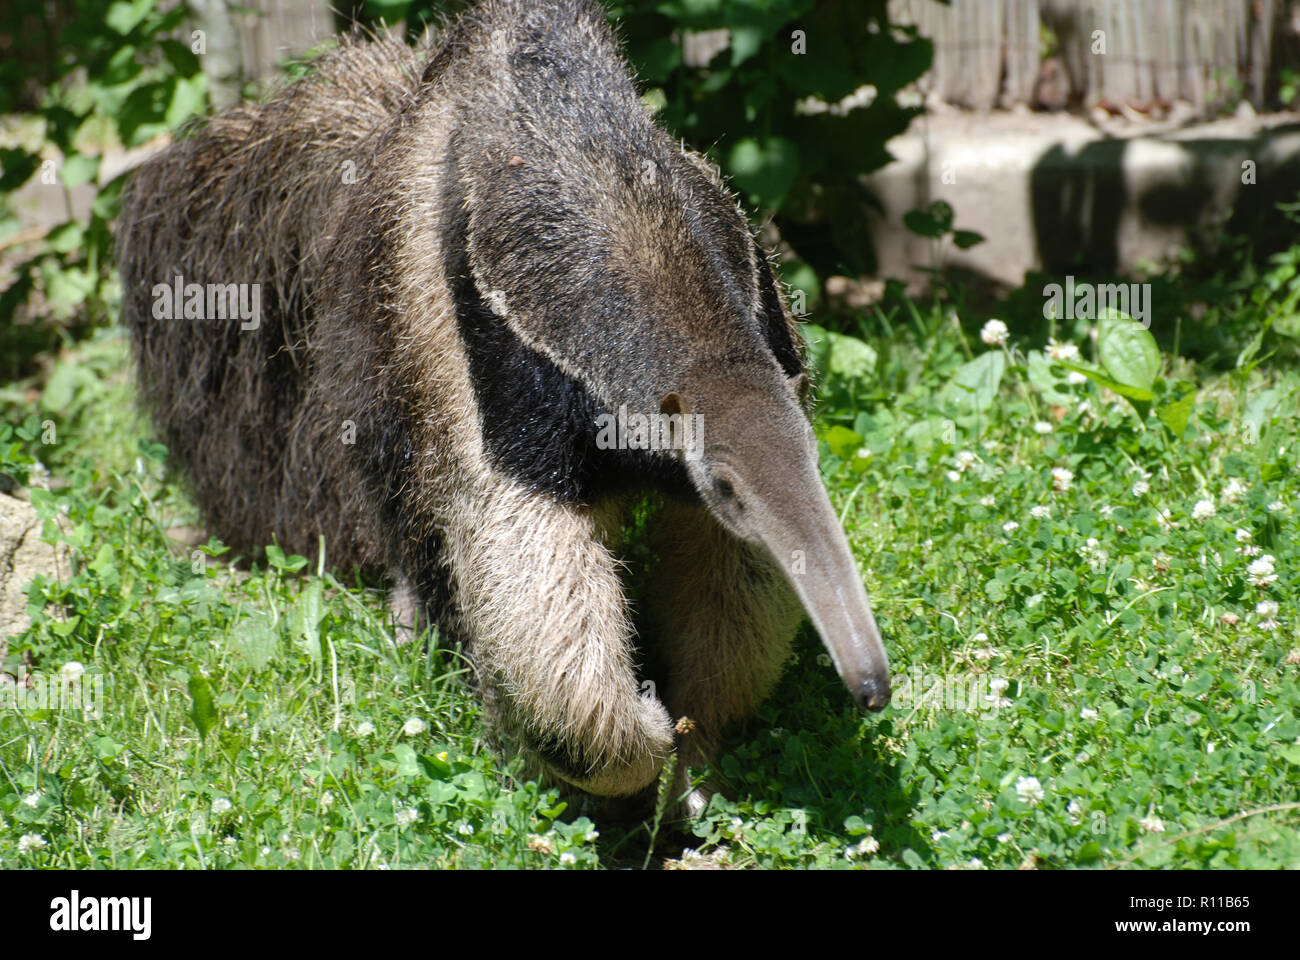 Great up close look at a giant anteater. Stock Photo